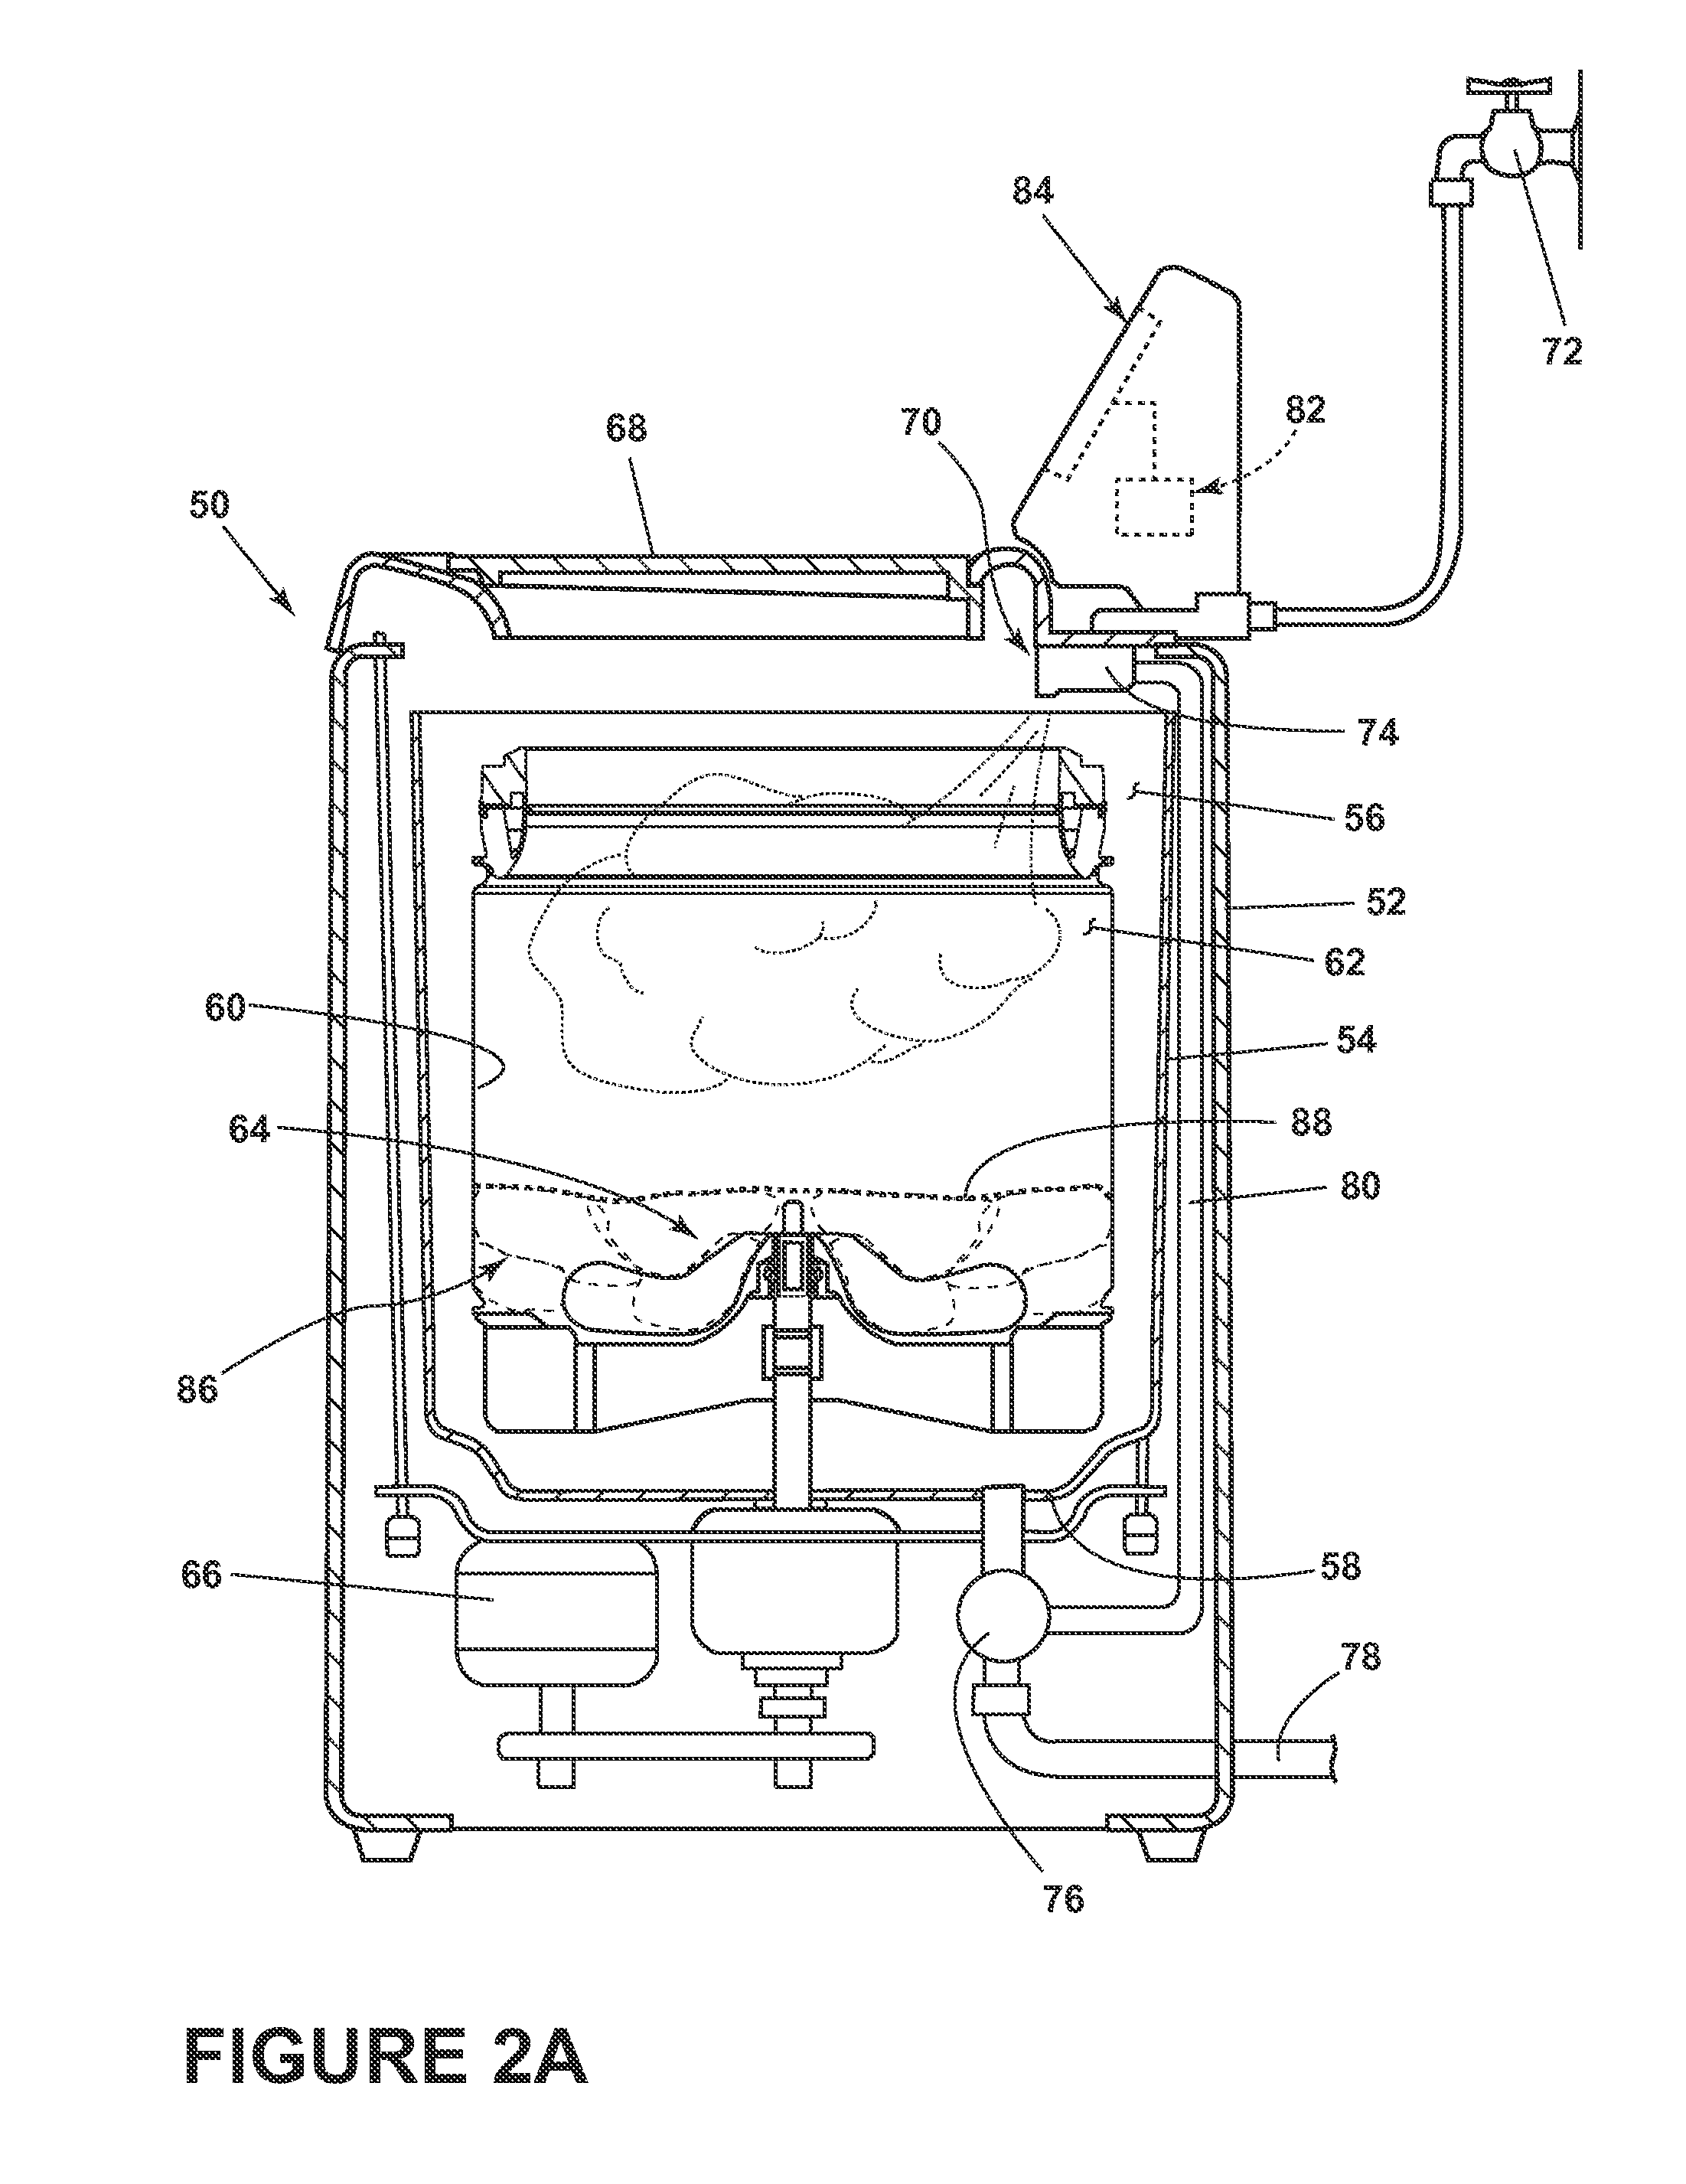 Methods and compositions for treating laundry items